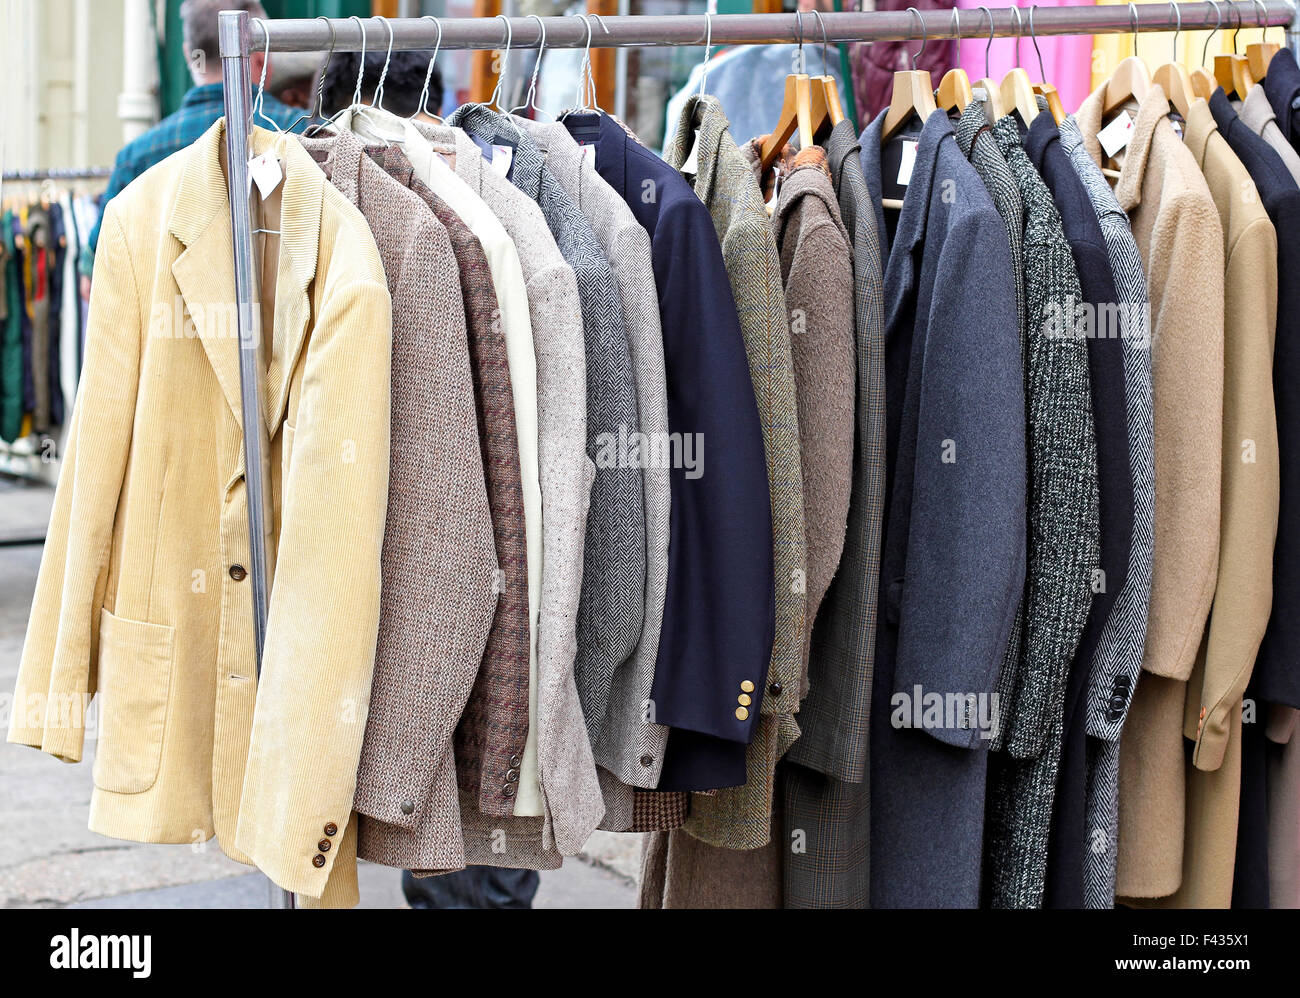 Suits at rail Stock Photo